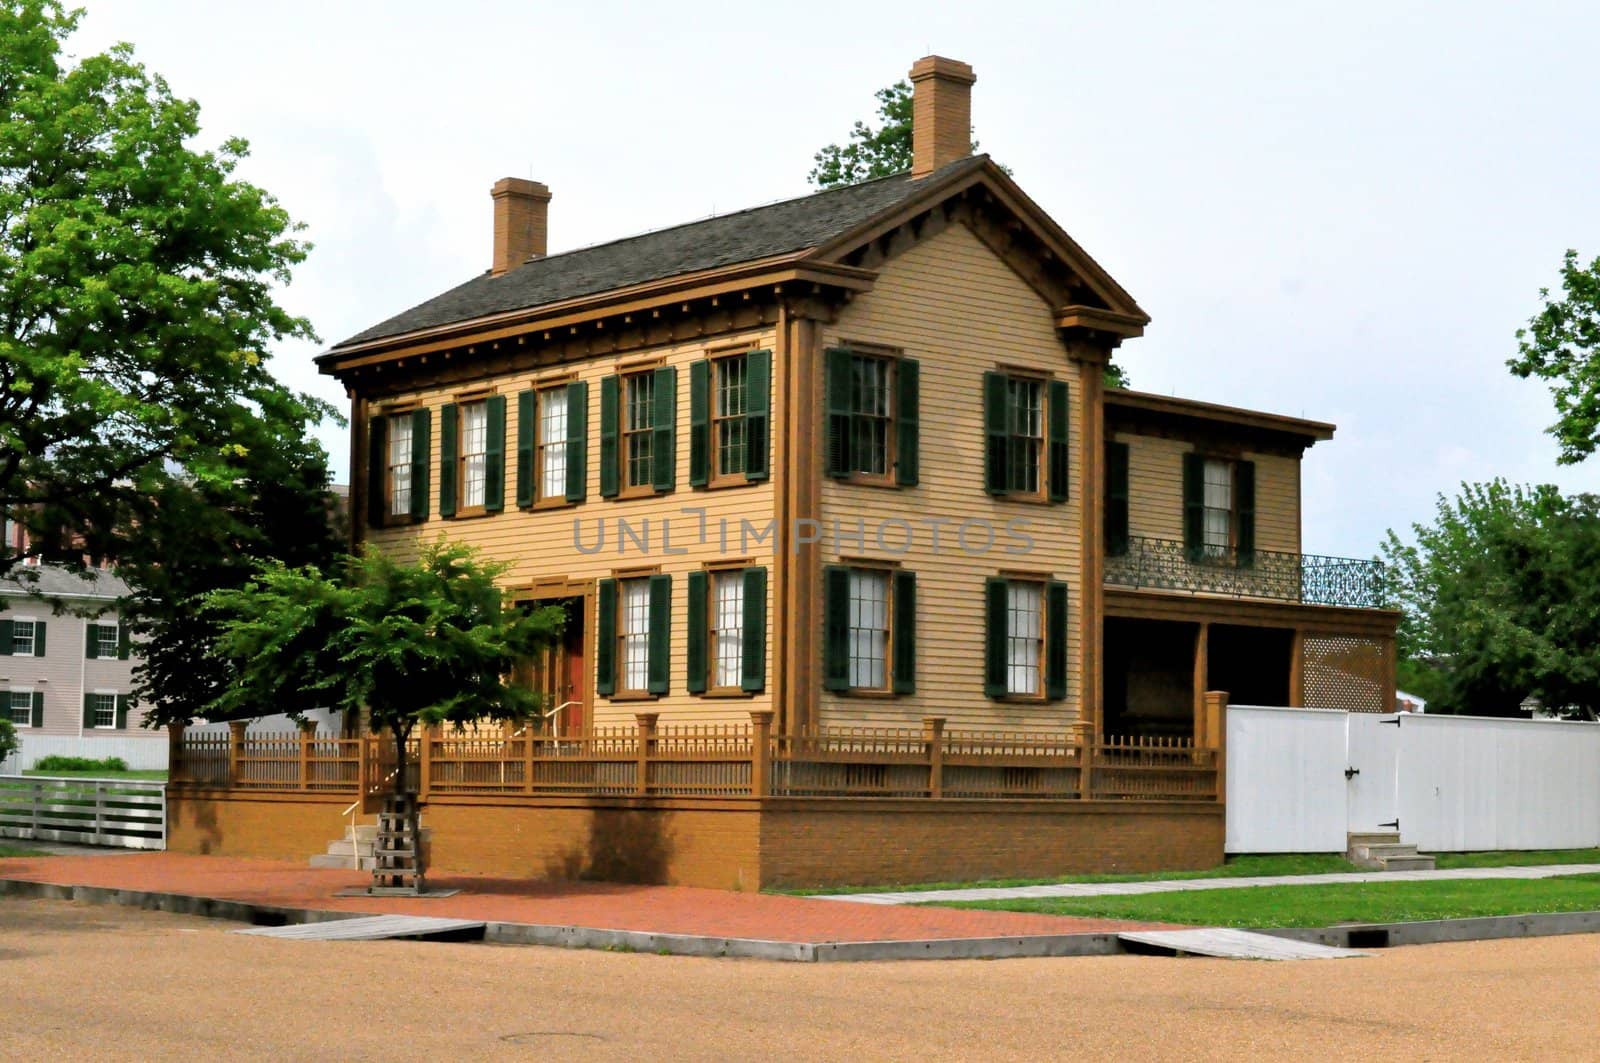  Lincoln Home